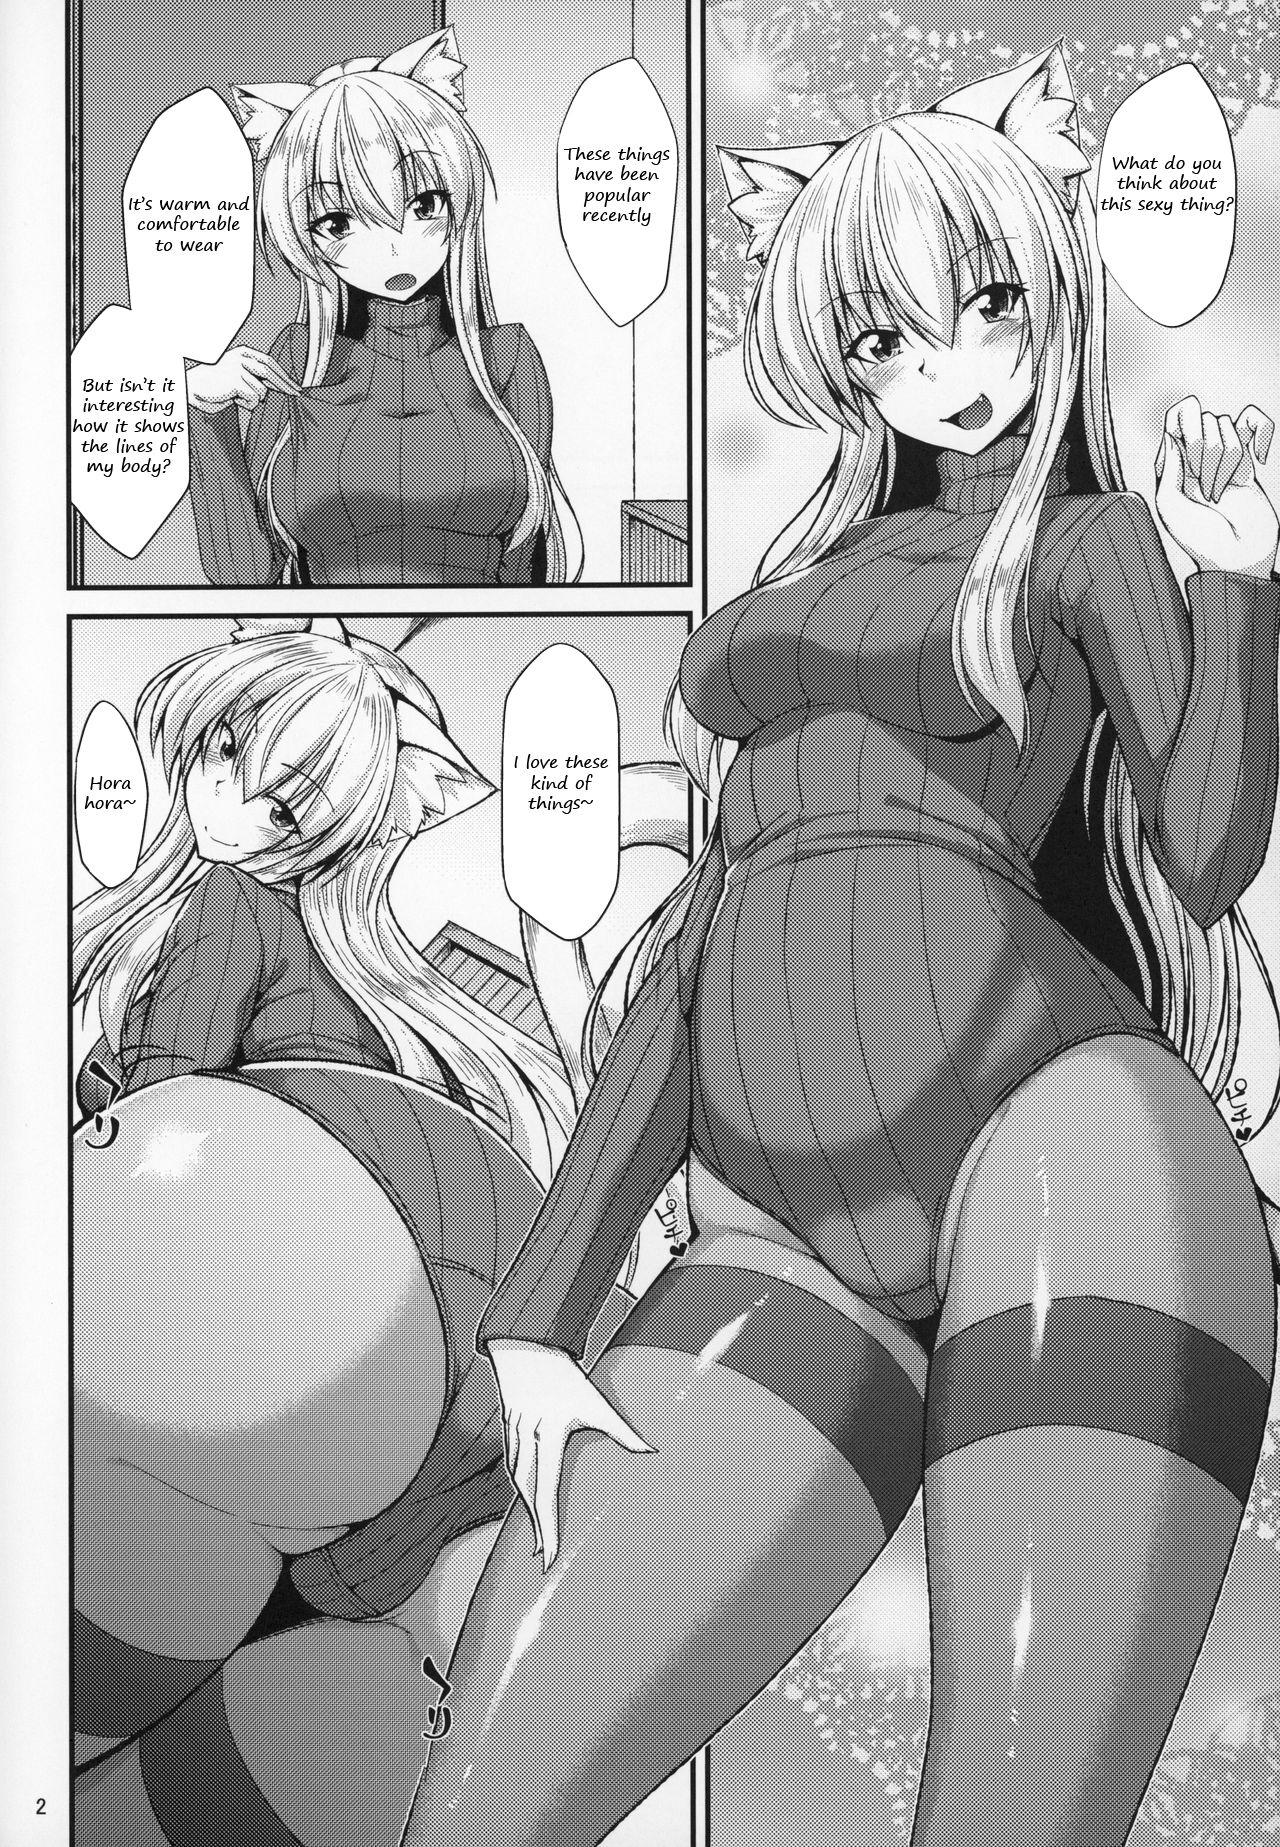 Missionary Position Porn (C97) [ENNUI (Nokoppa)] Nekomimi Onee-san to Onaho de Nyan Nyan | The cat-eared Onee-san and the Onahole [English] - Original Gay Money - Page 3